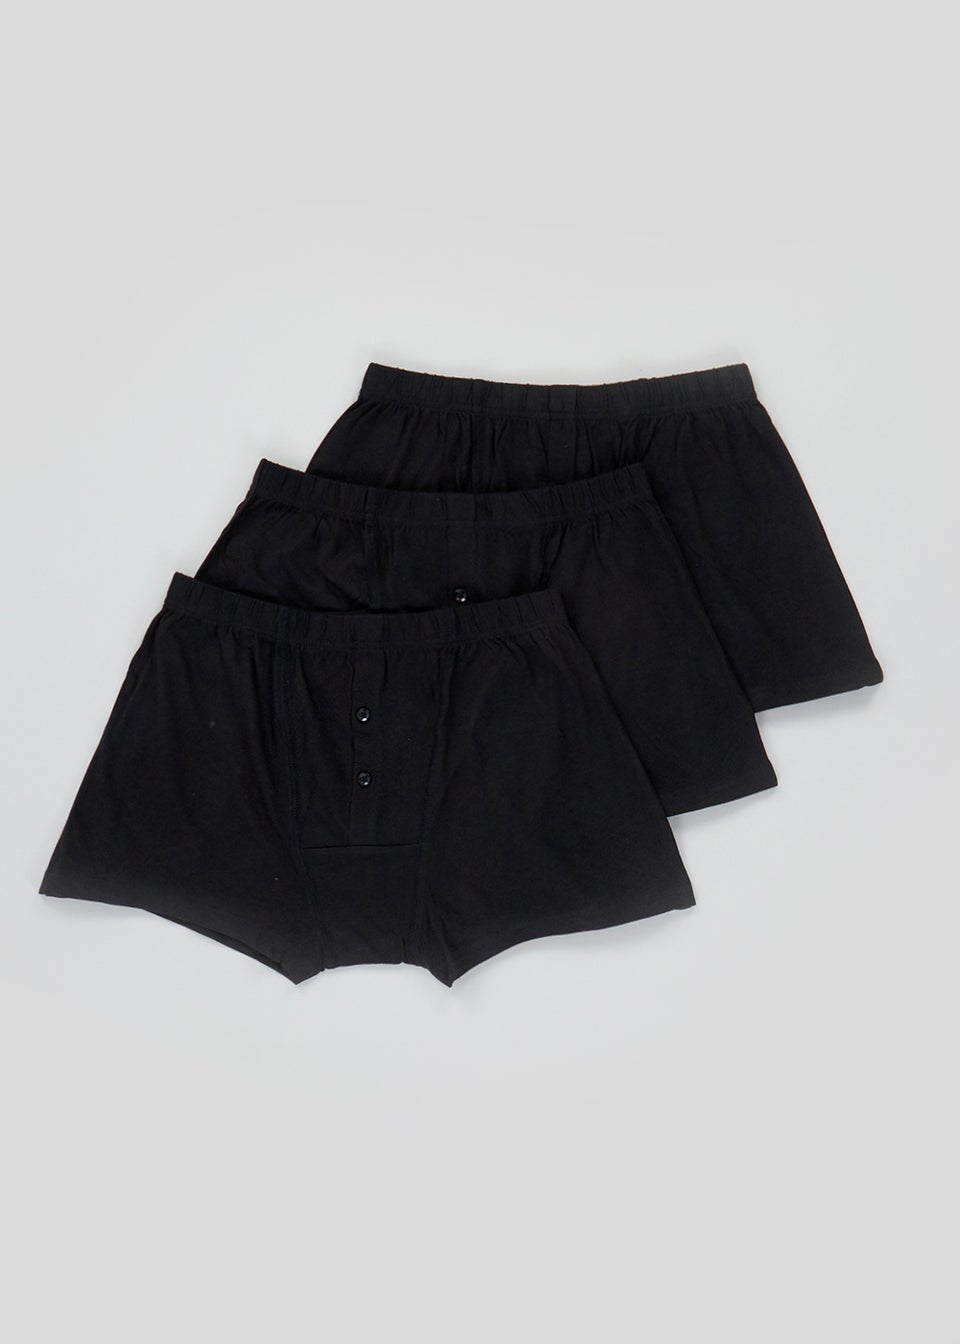 3 Pack Black Jersey Boxers